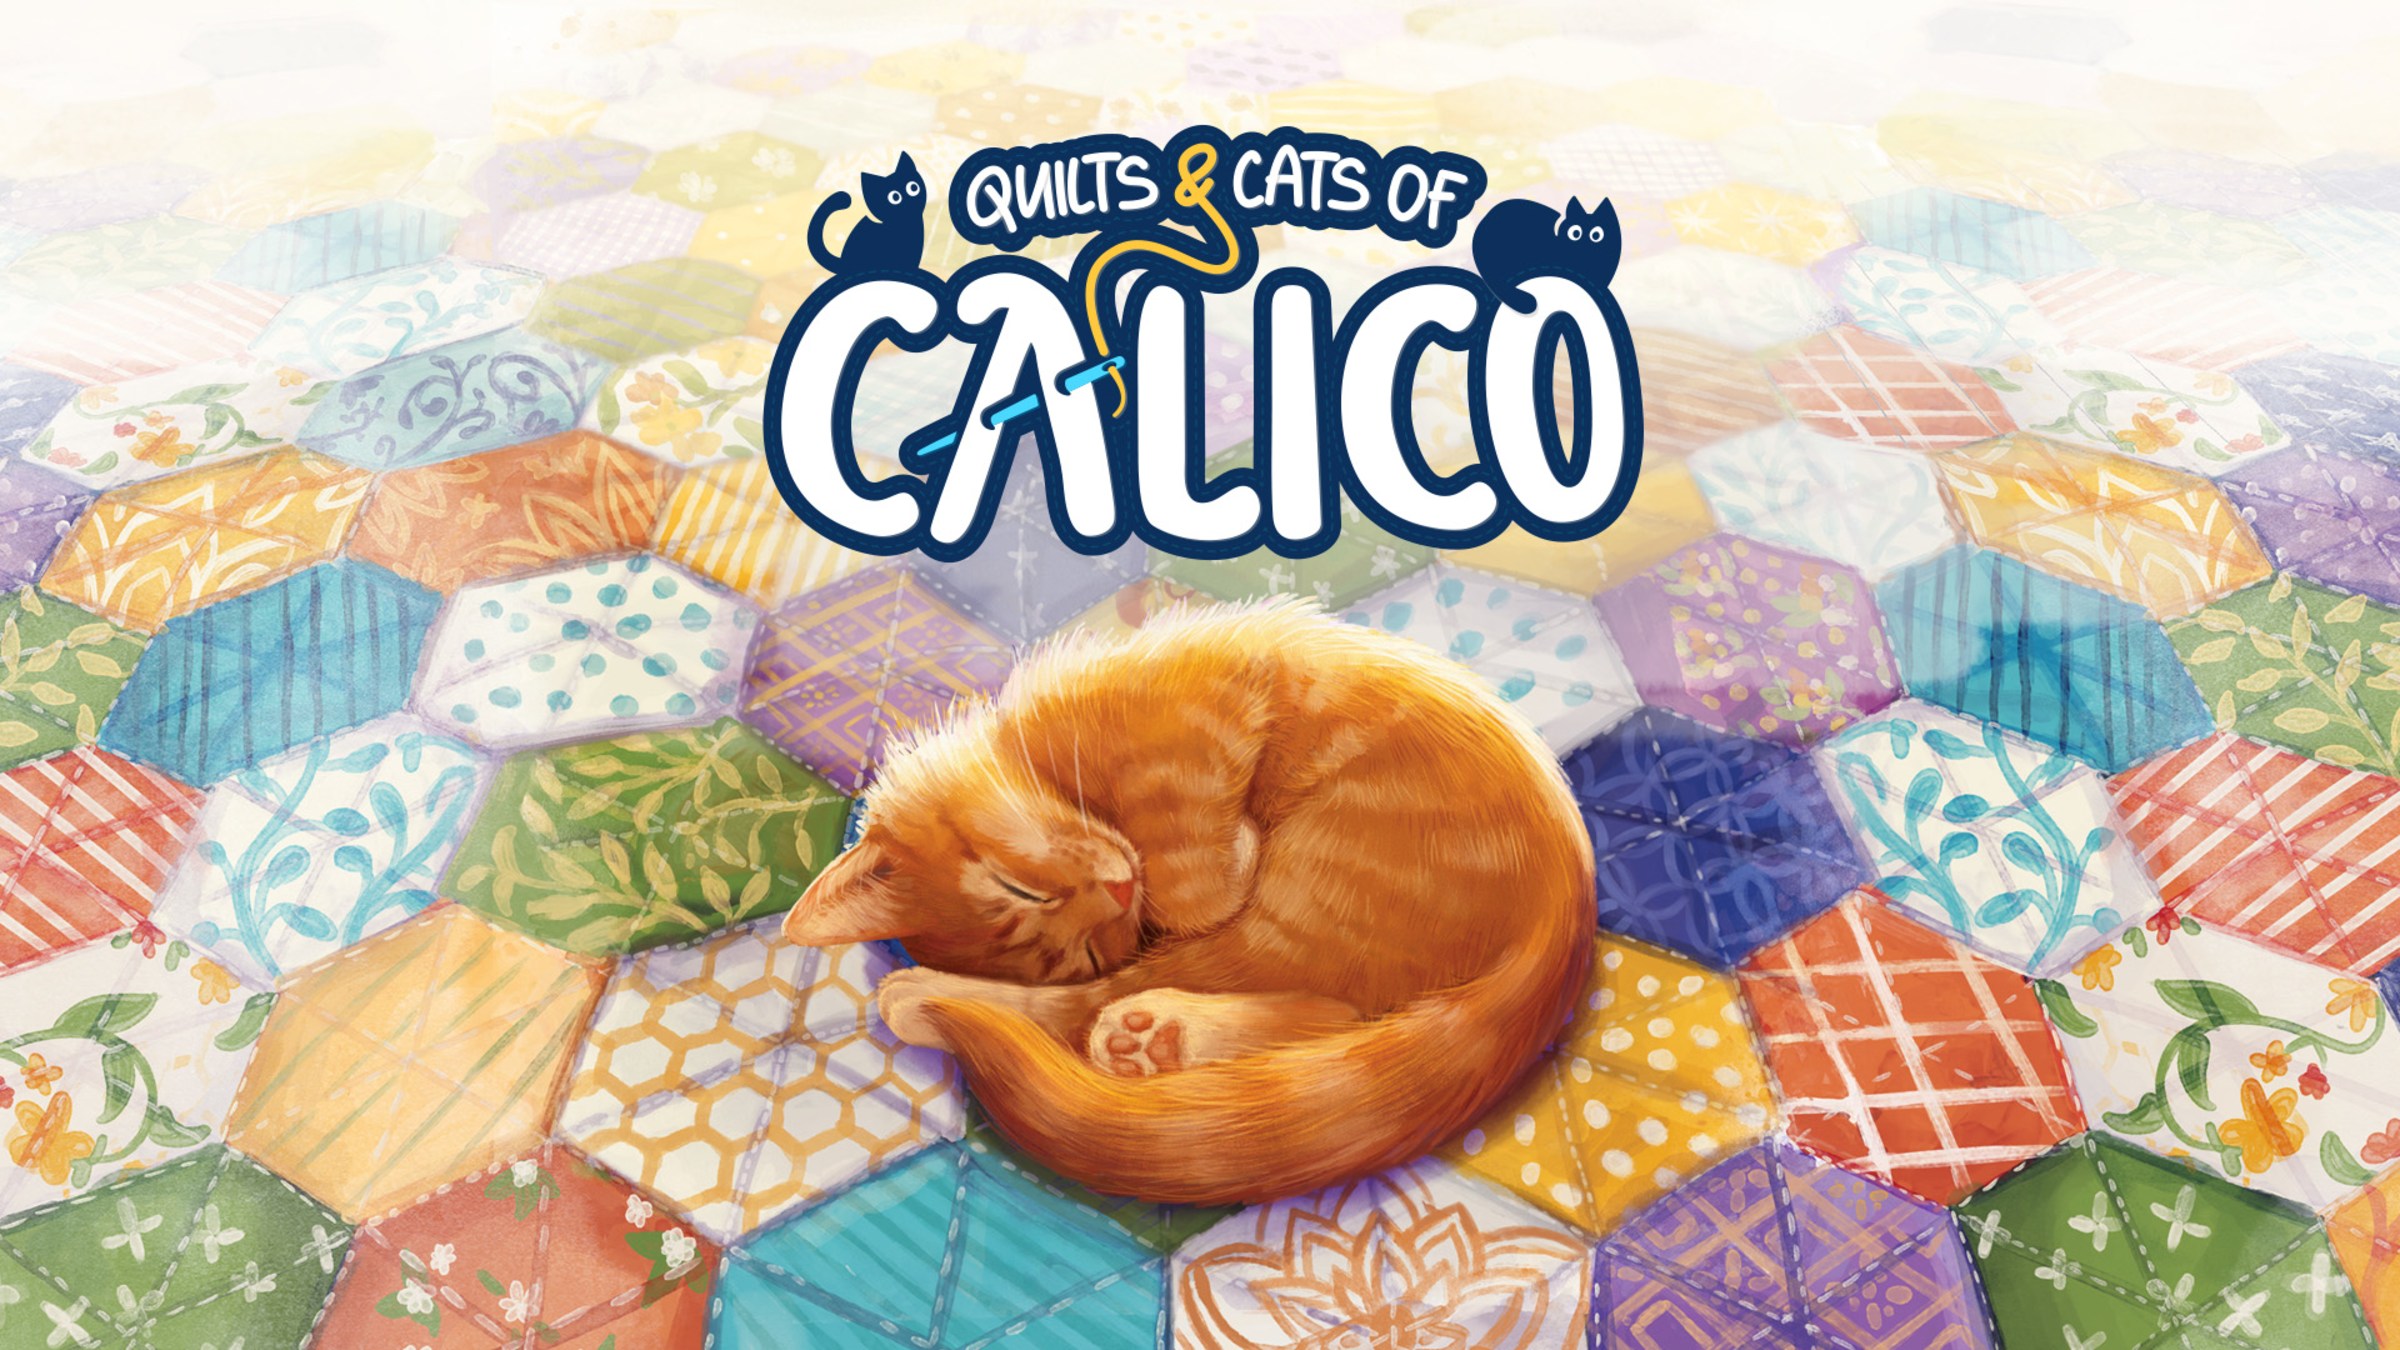 Quilts and Cats of Calico PC Cracked Version Full Game Setup Free Download